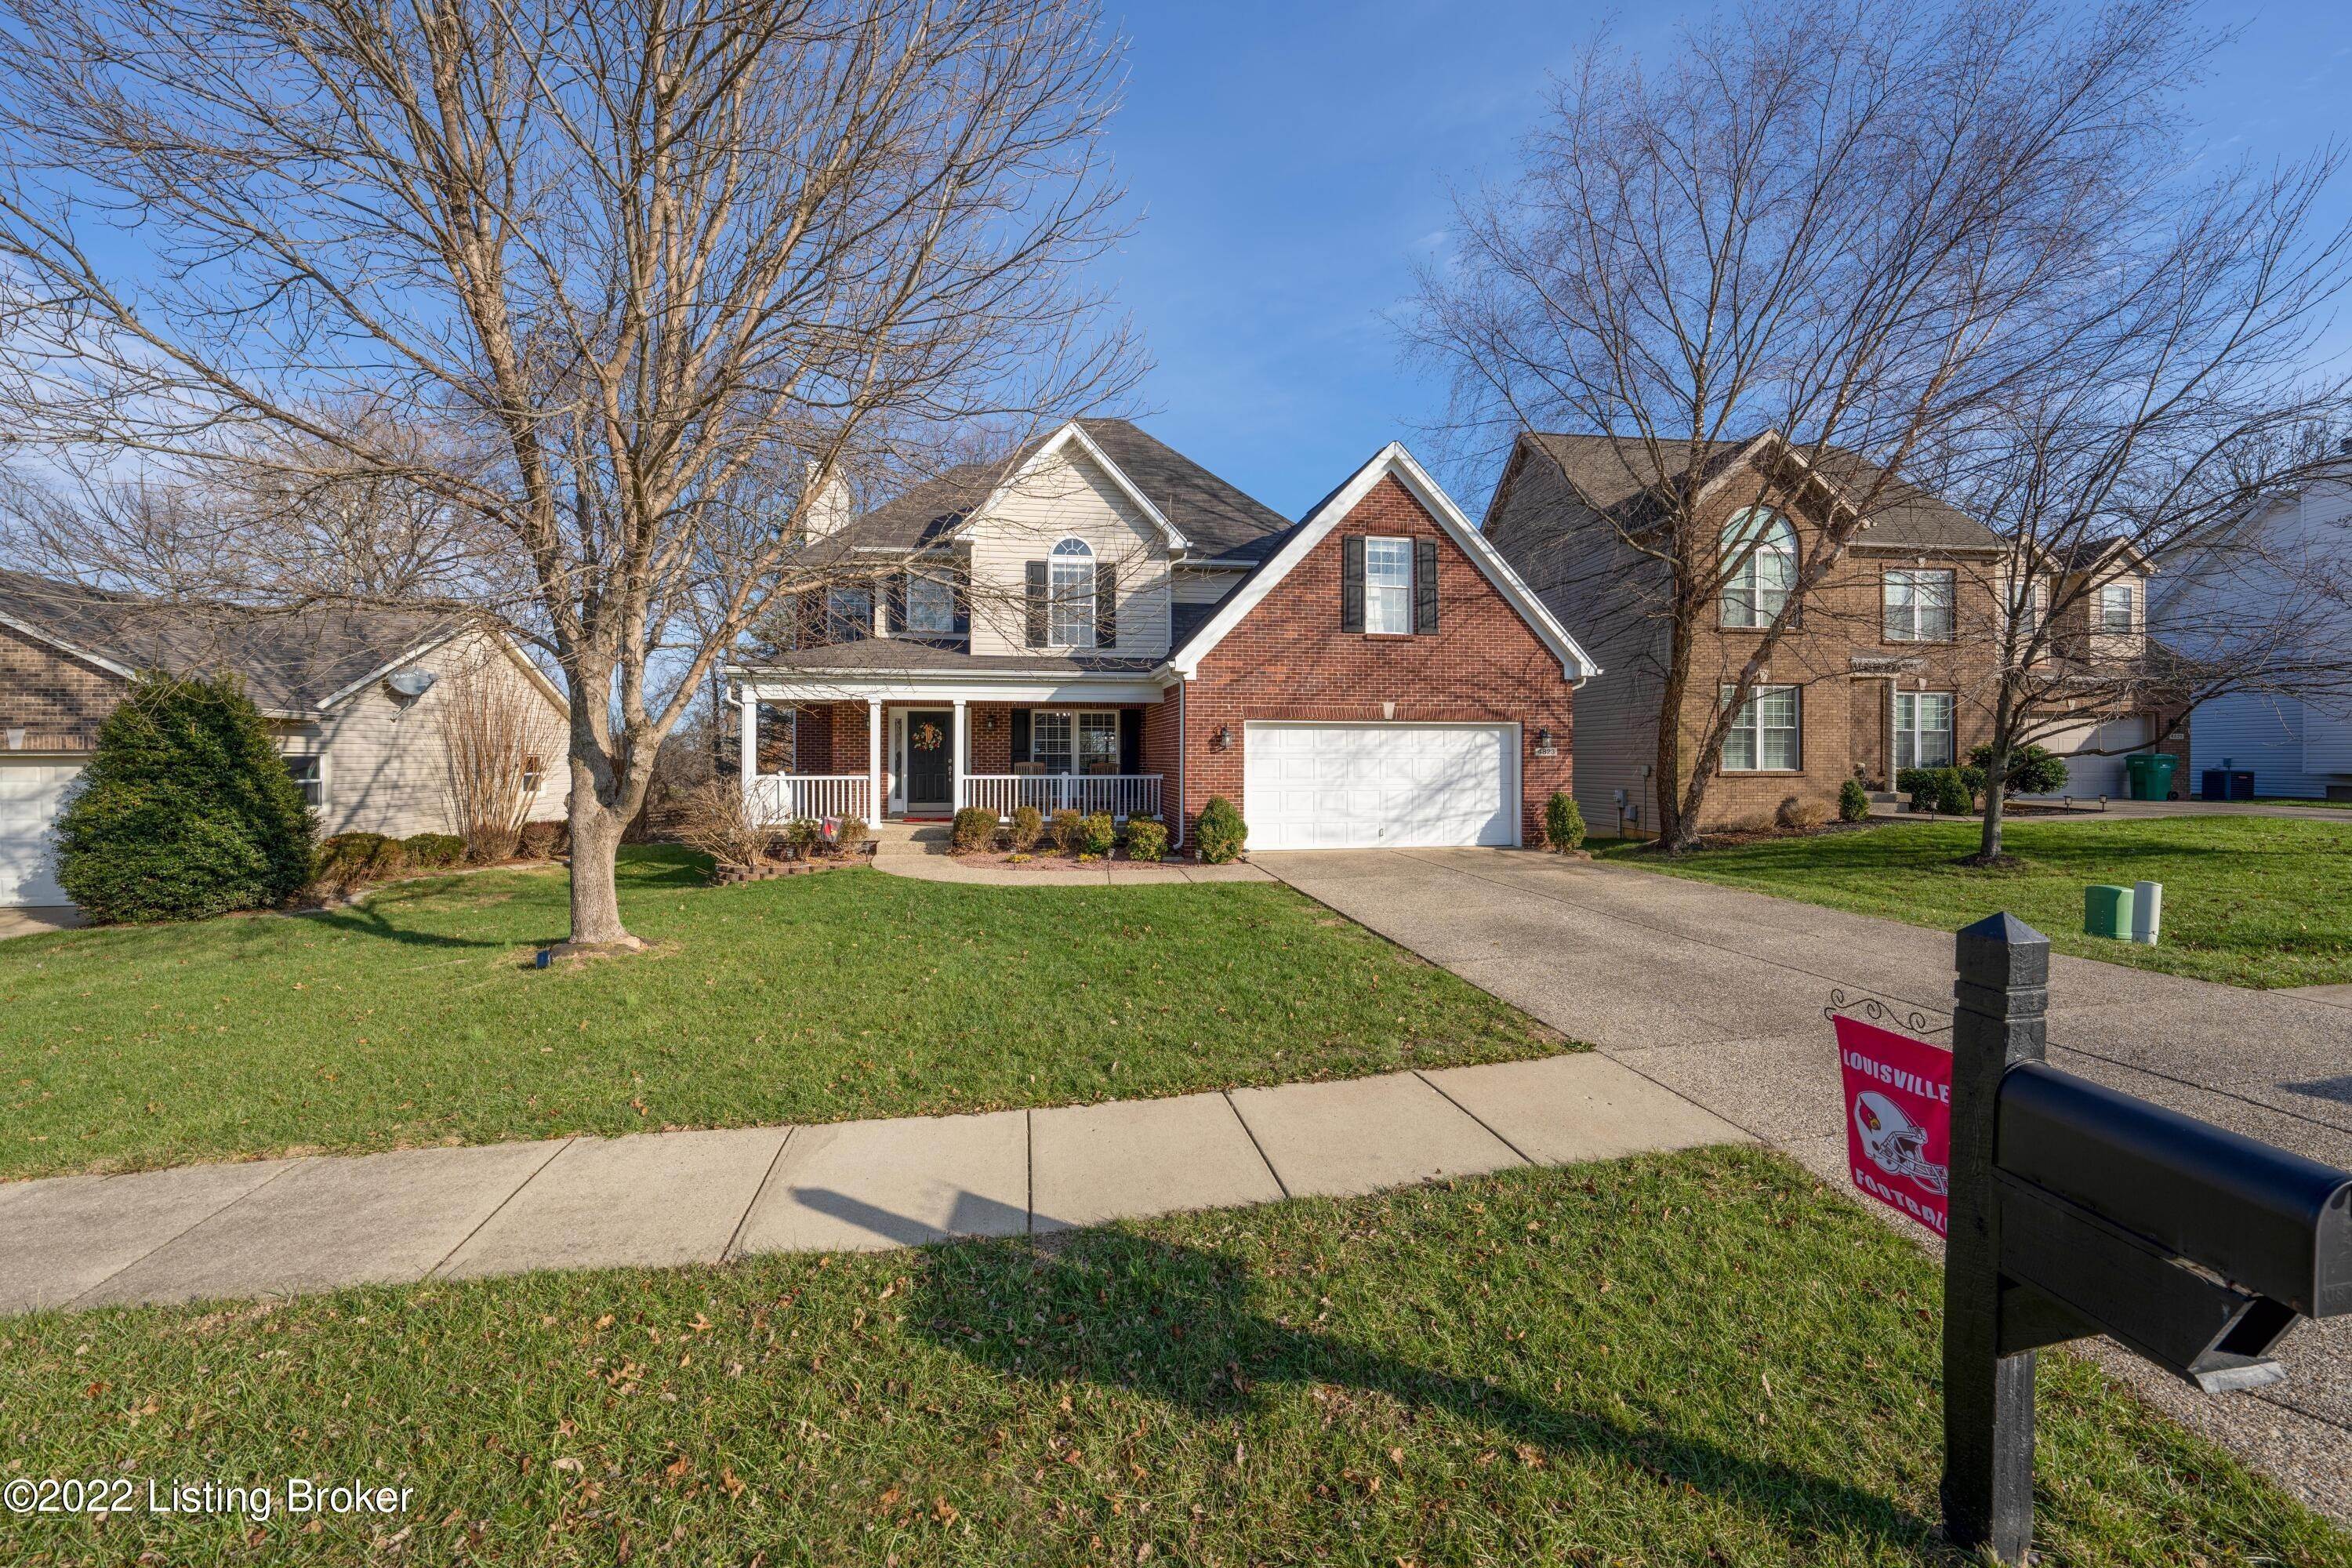 43. Single Family at Louisville, KY 40299